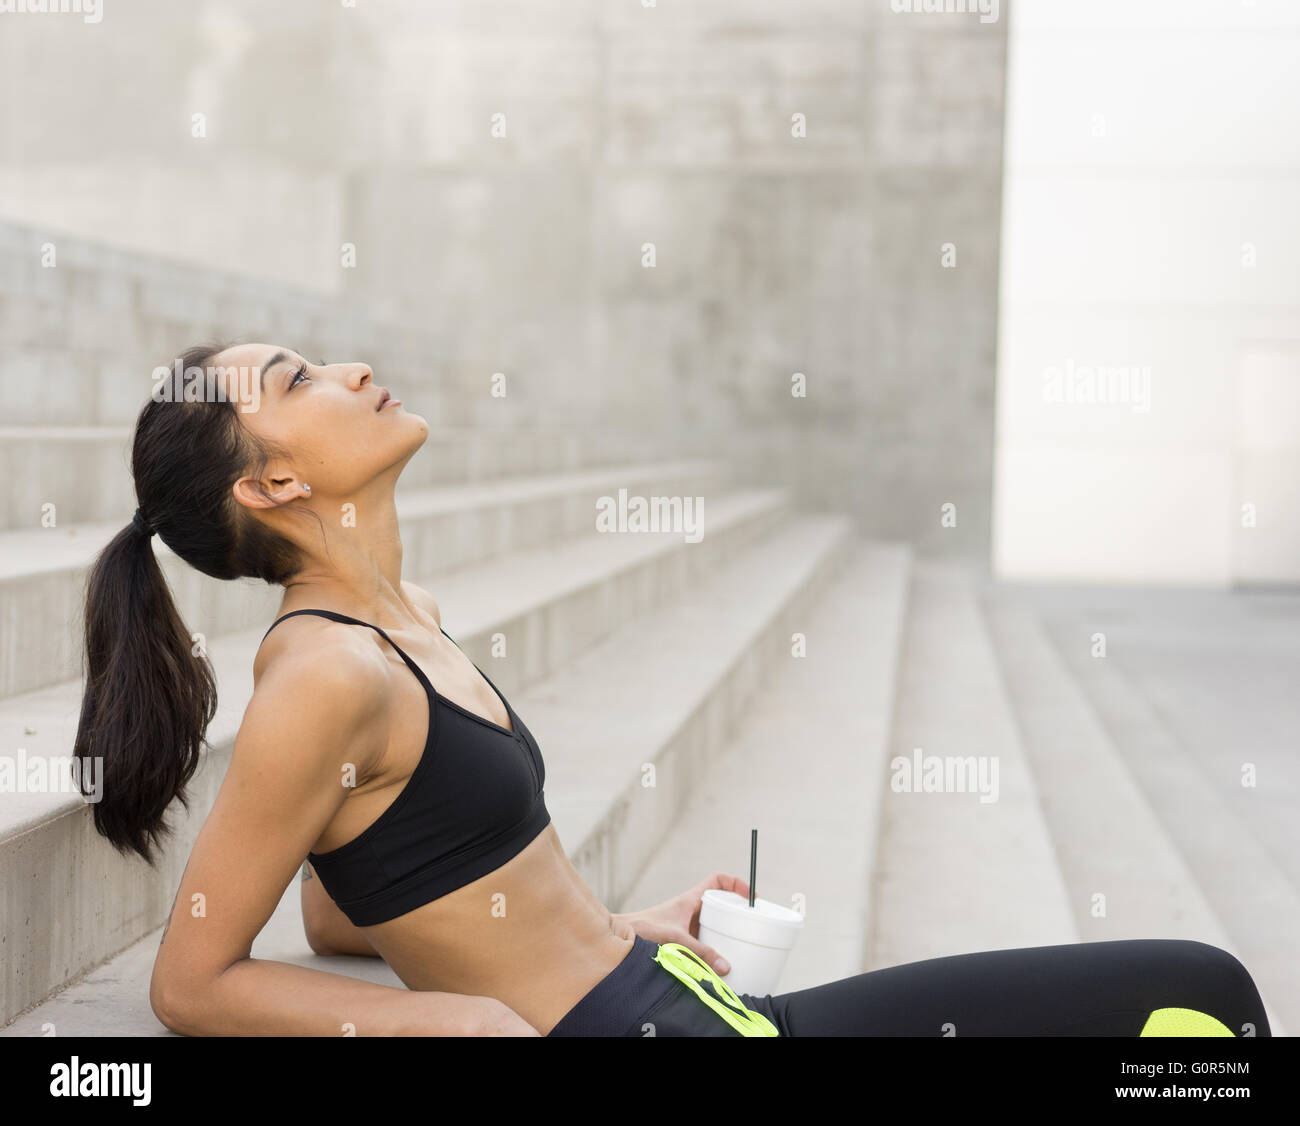 Young multi ethnic woman in exercise, gym, workout clothes, series of fitness wellness inspired imagery Stock Photo